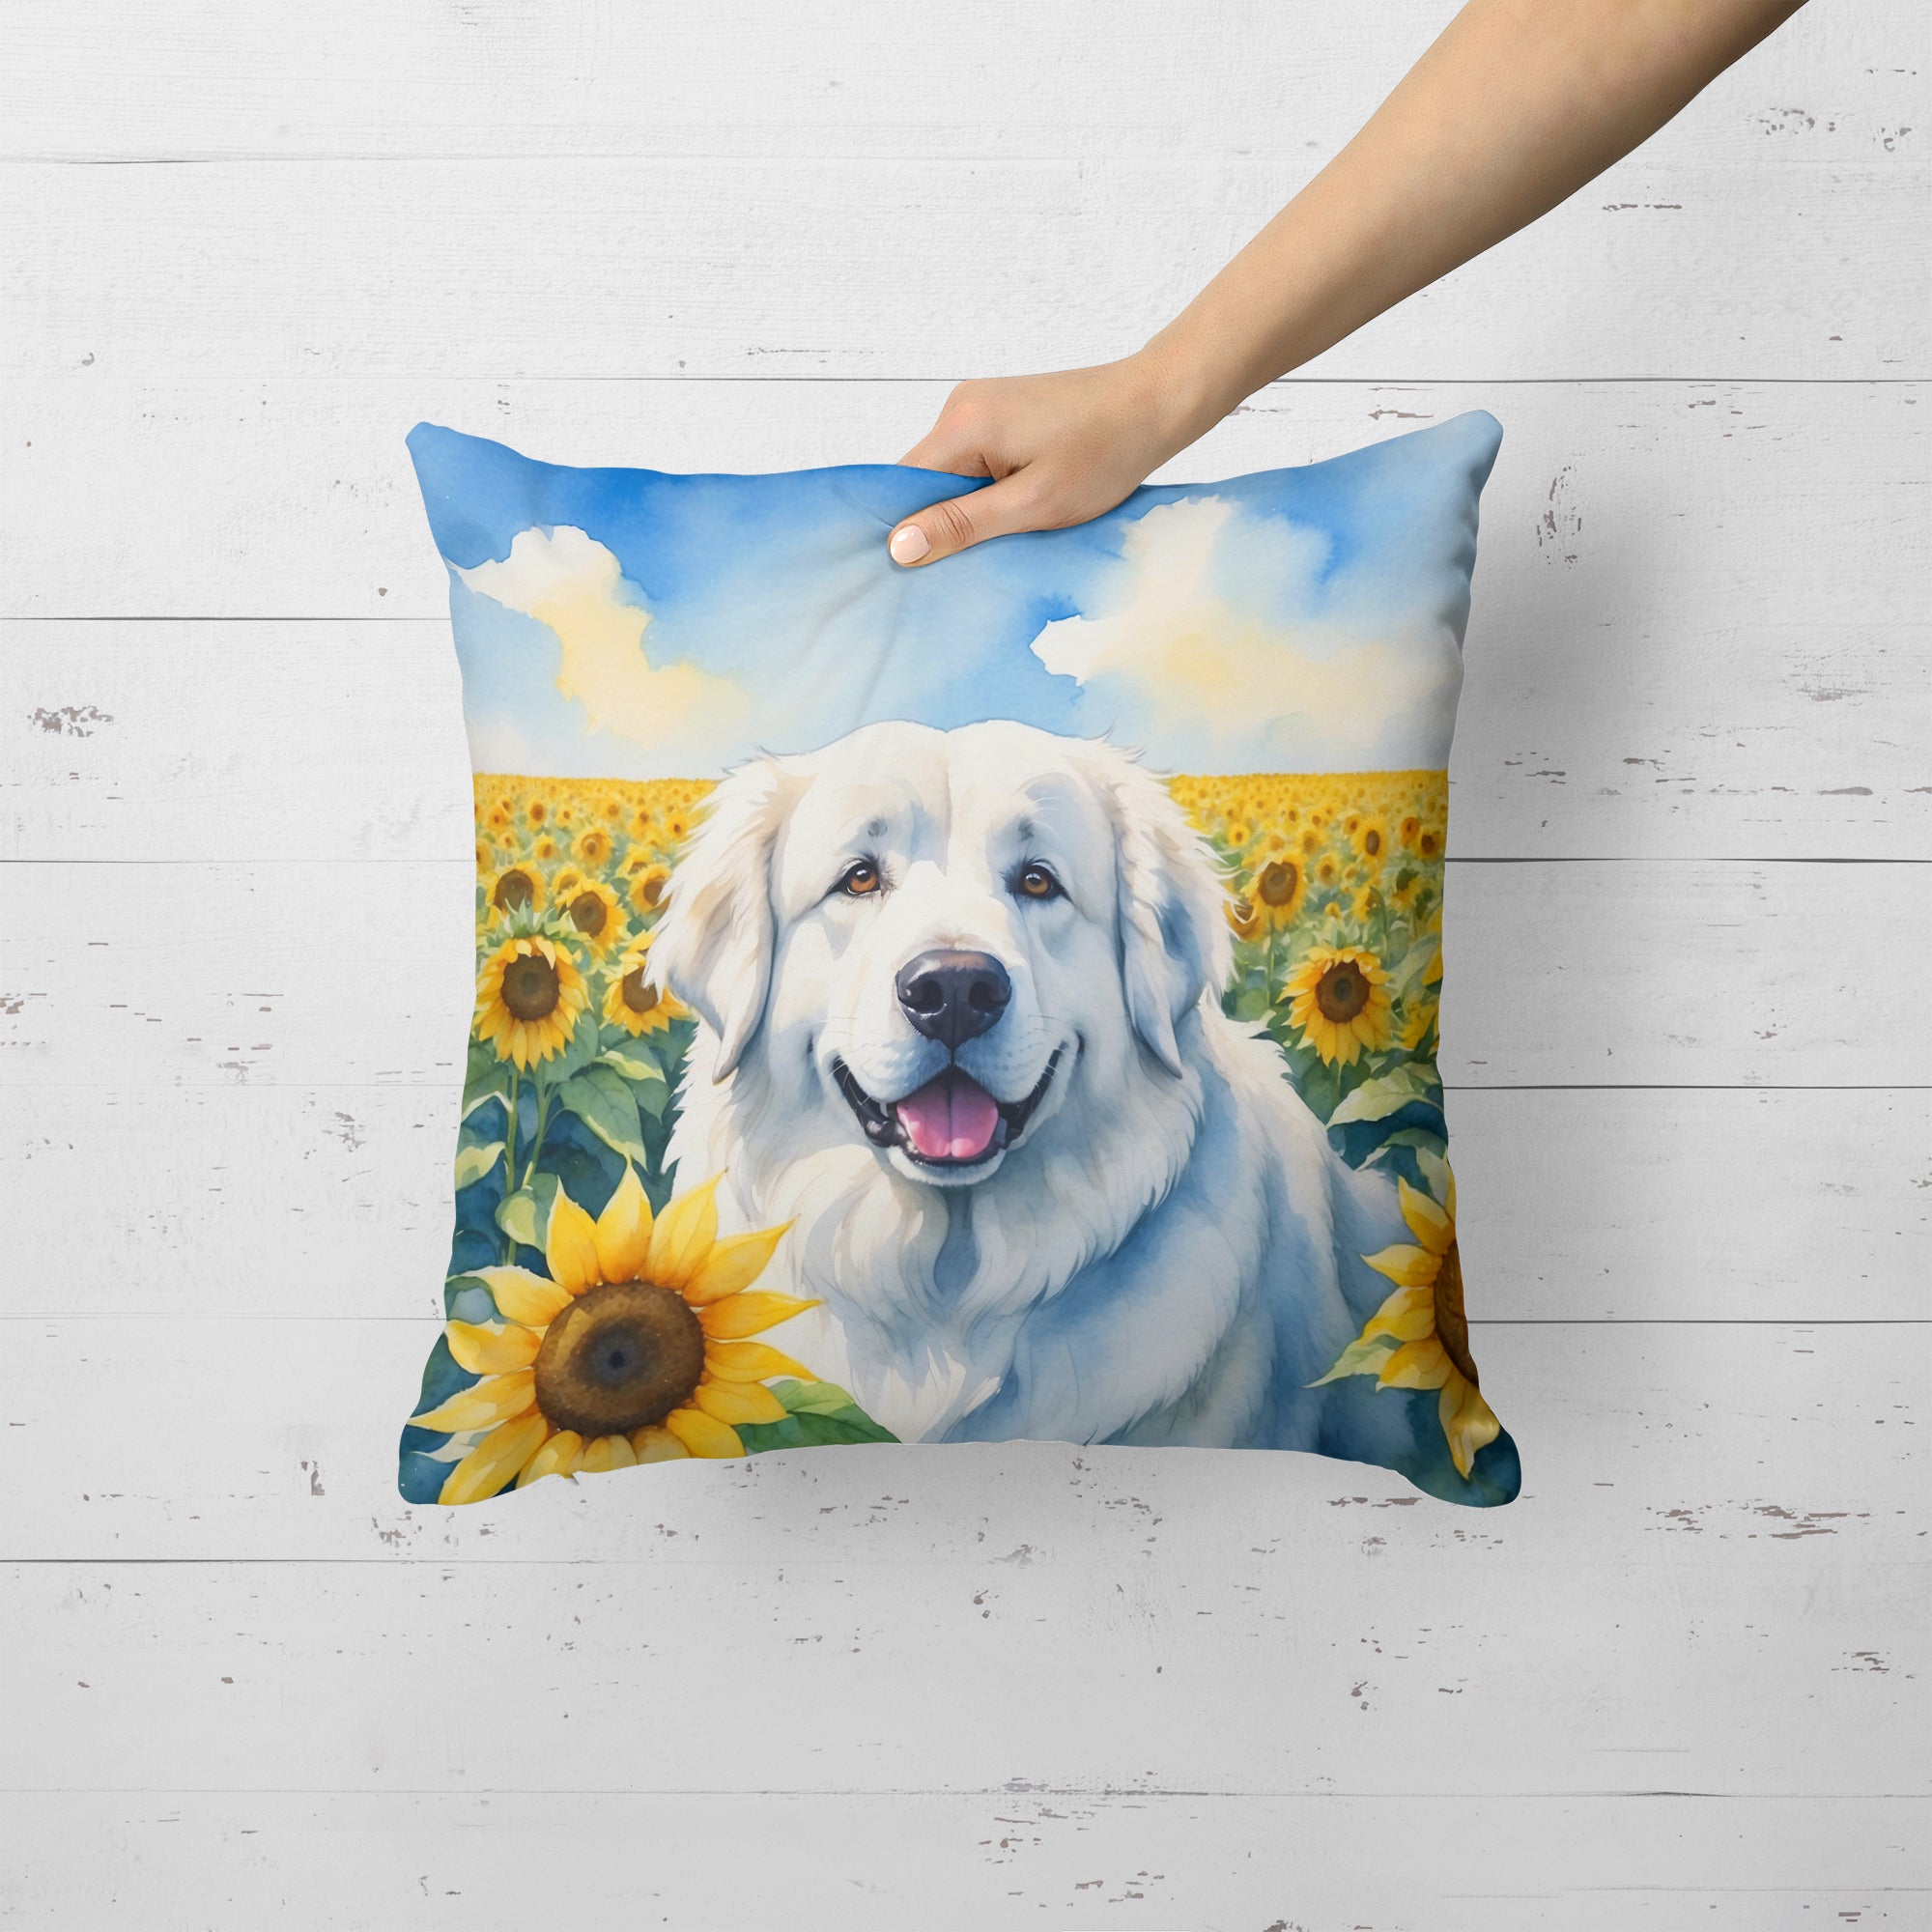 Buy this Great Pyrenees in Sunflowers Throw Pillow